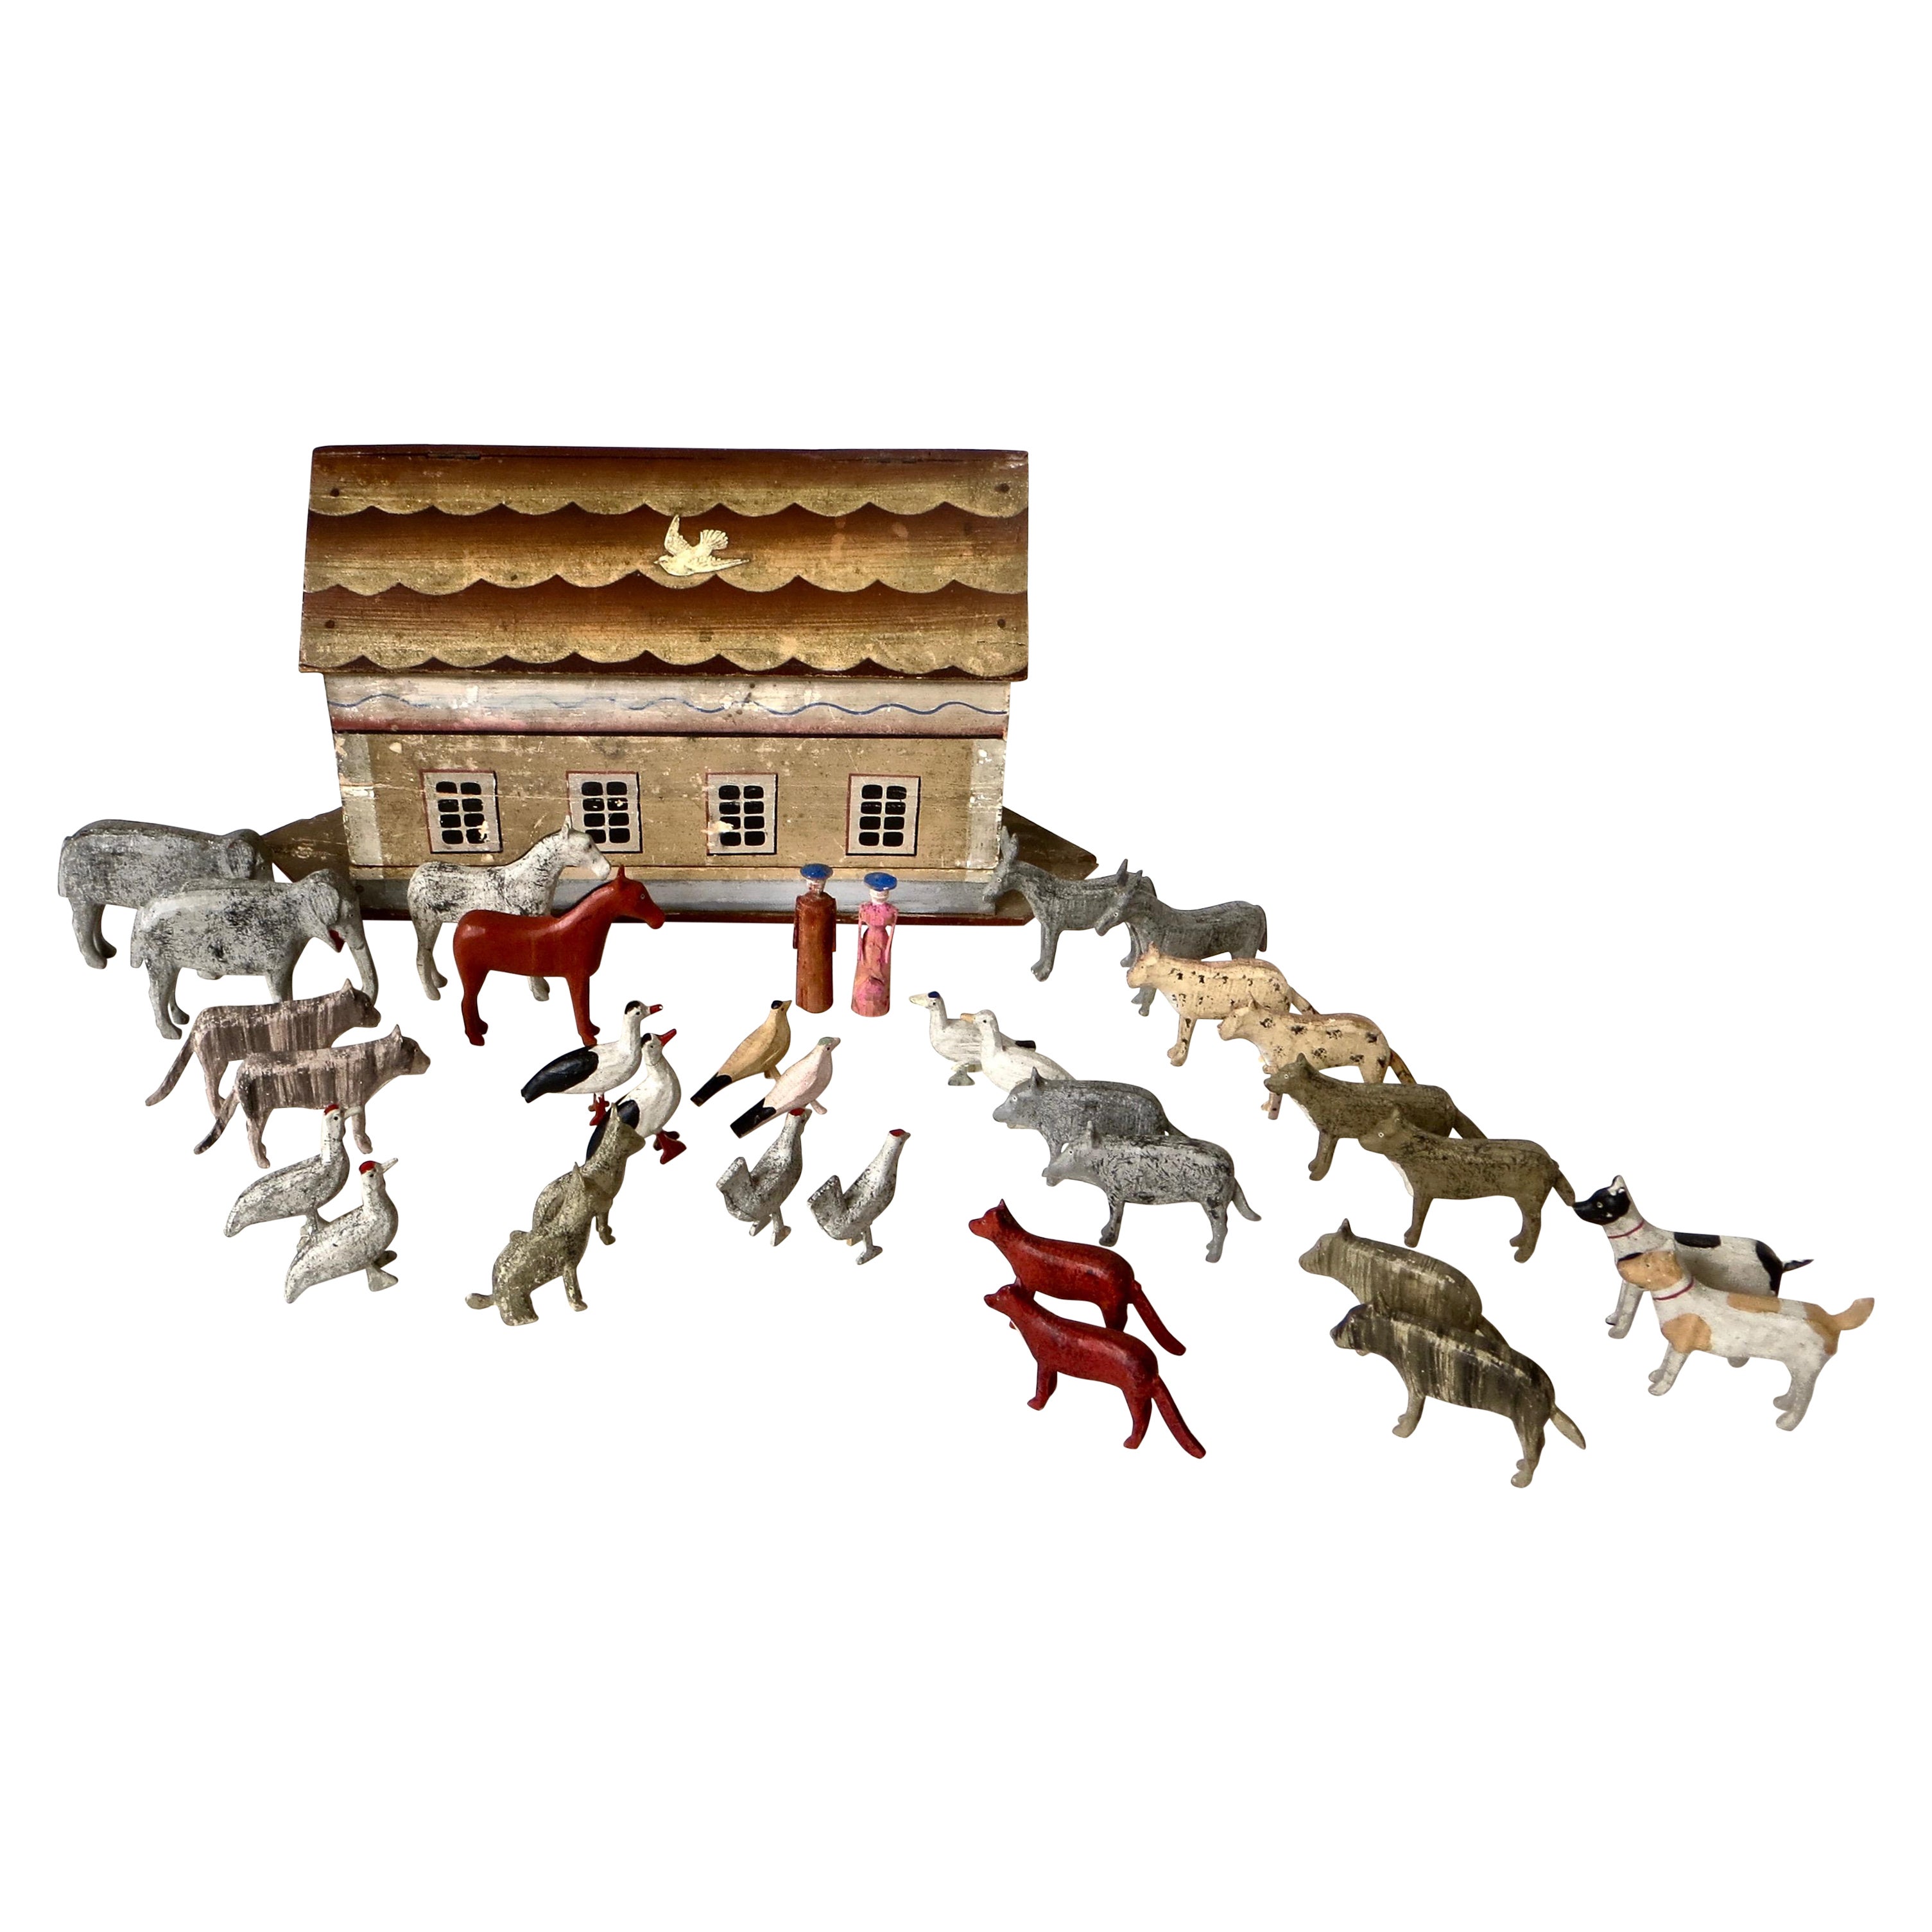 Late 19th Century Flat Bottom Toy Noah's Ark with 34 Figures. German Circa 1880